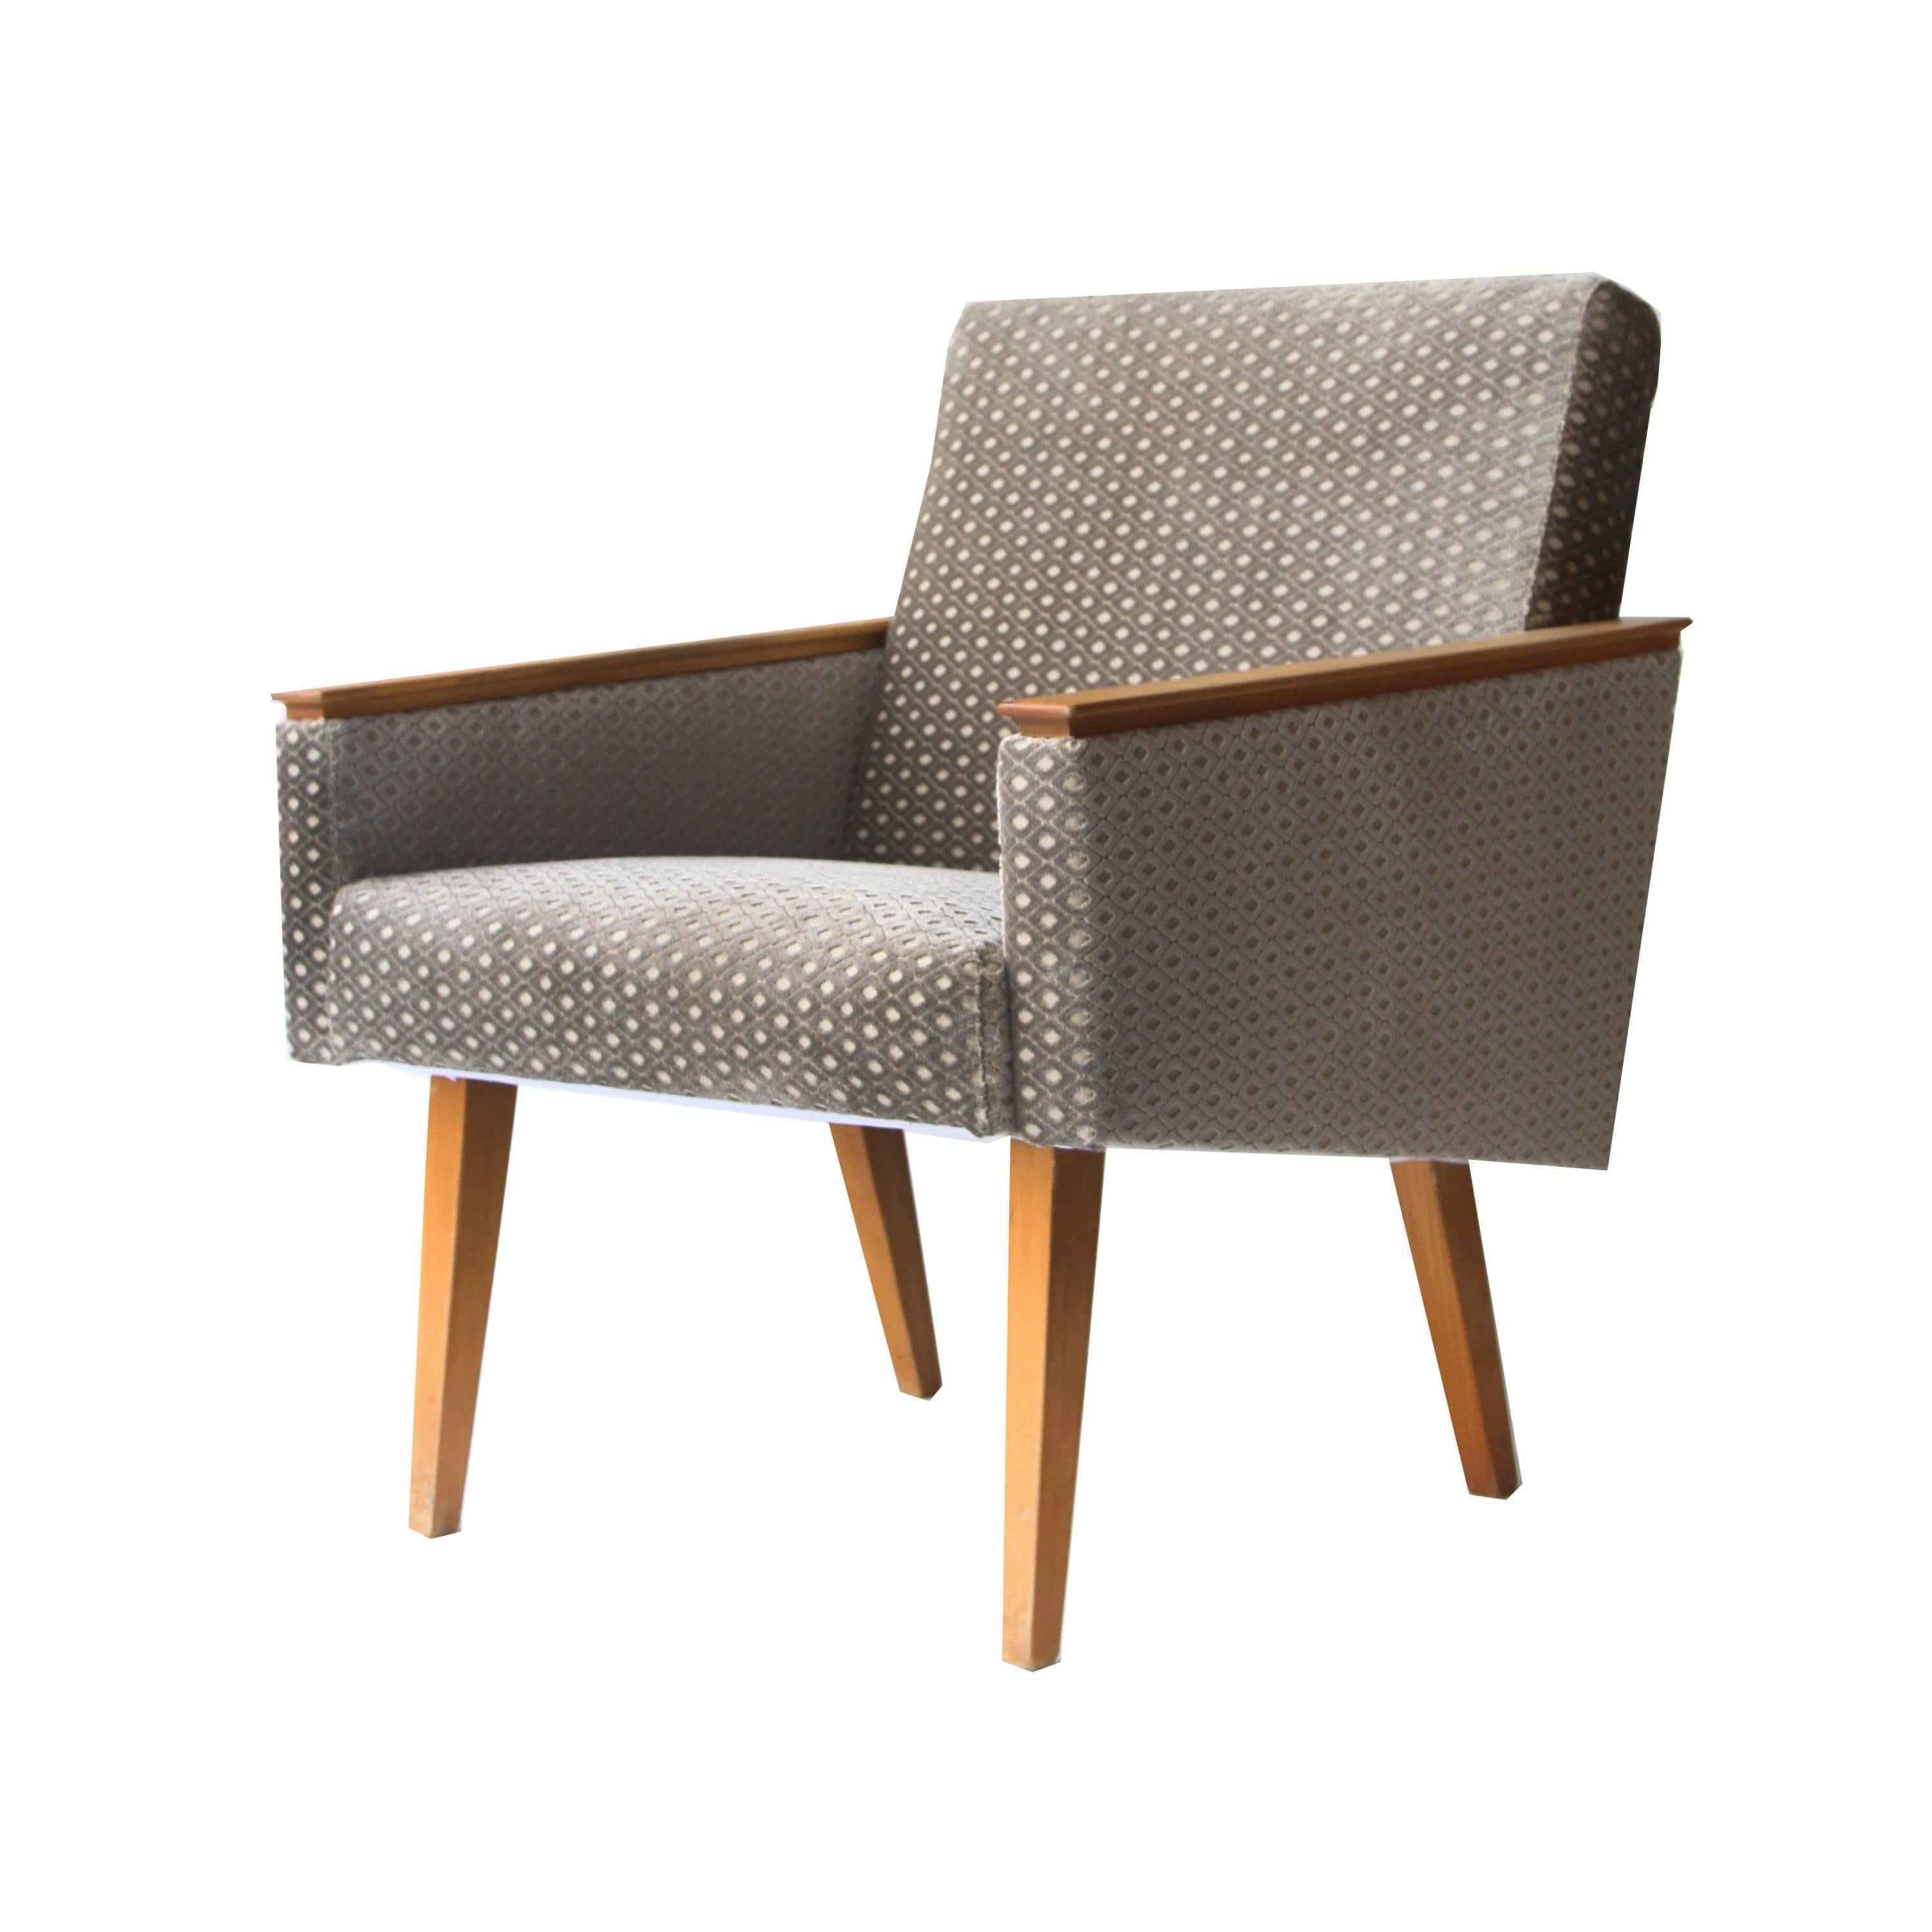 Pair of armchairs with elmwood structure and upholstered with cotton velvet fabric edited by Rubelli.